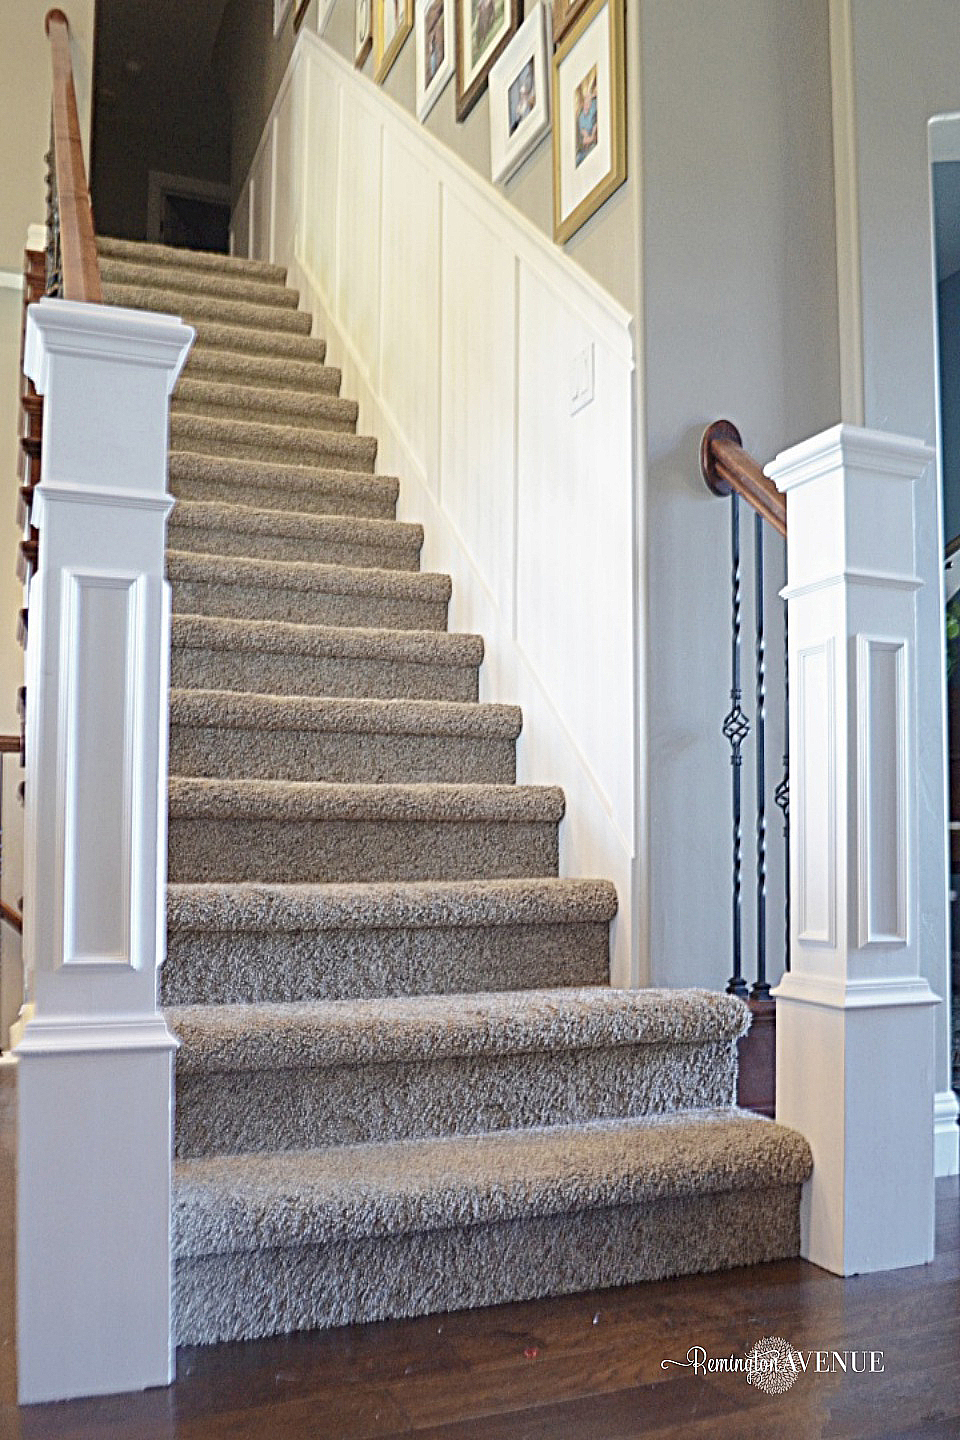 An after image of a staircase with white molding